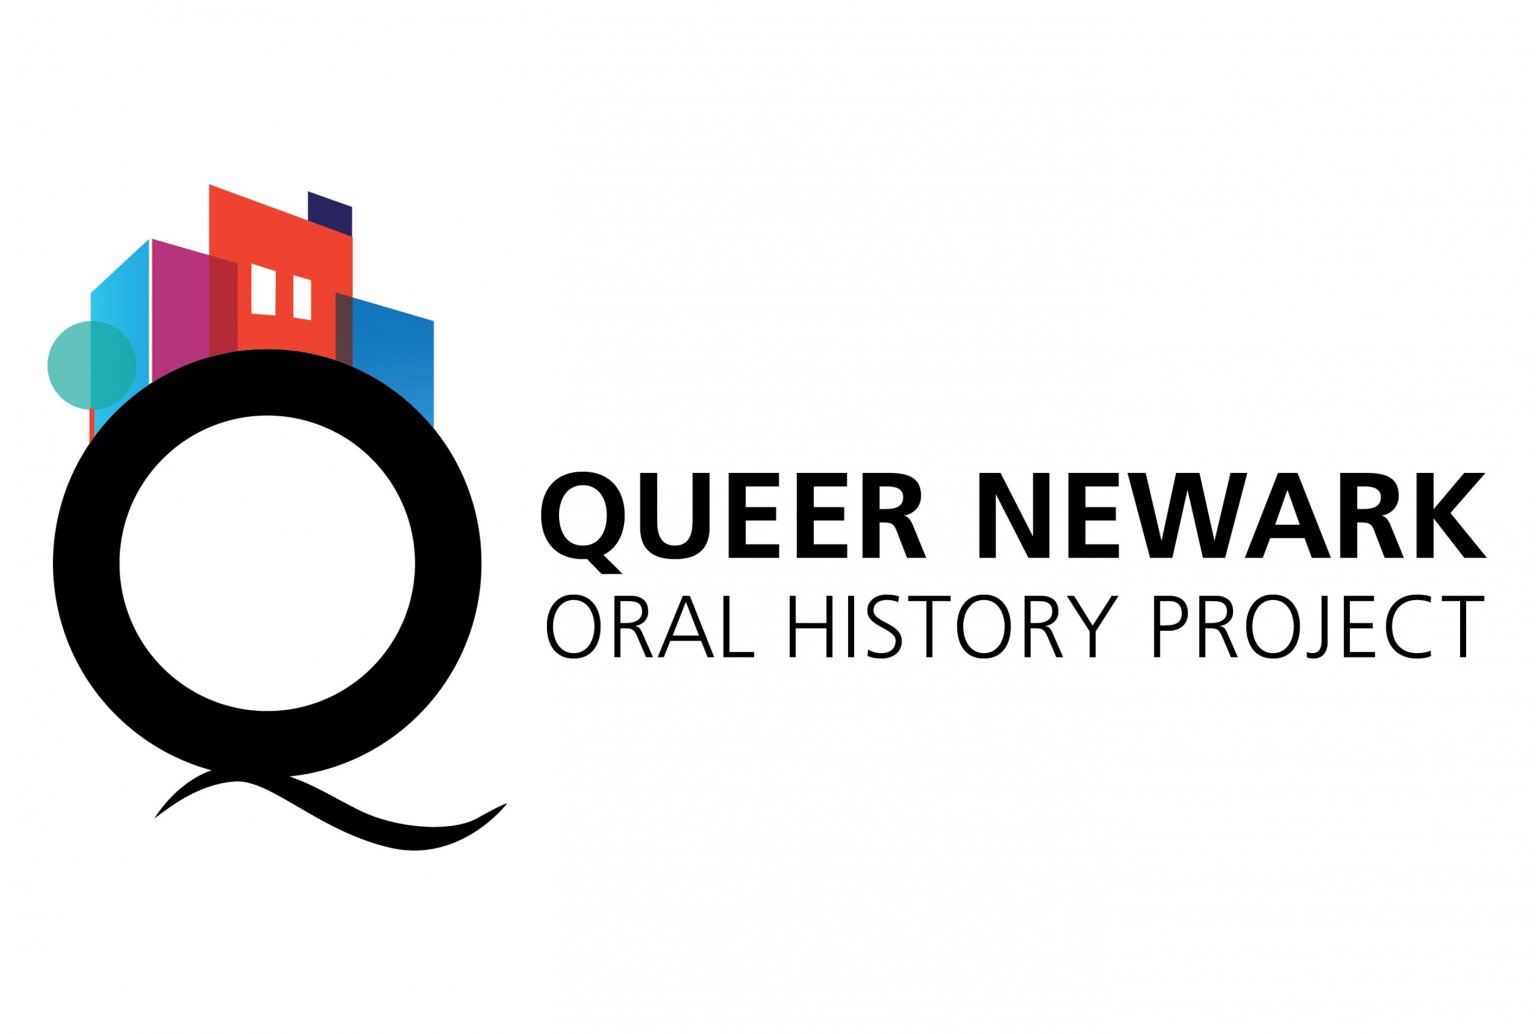 Queer Newark Oral History Project